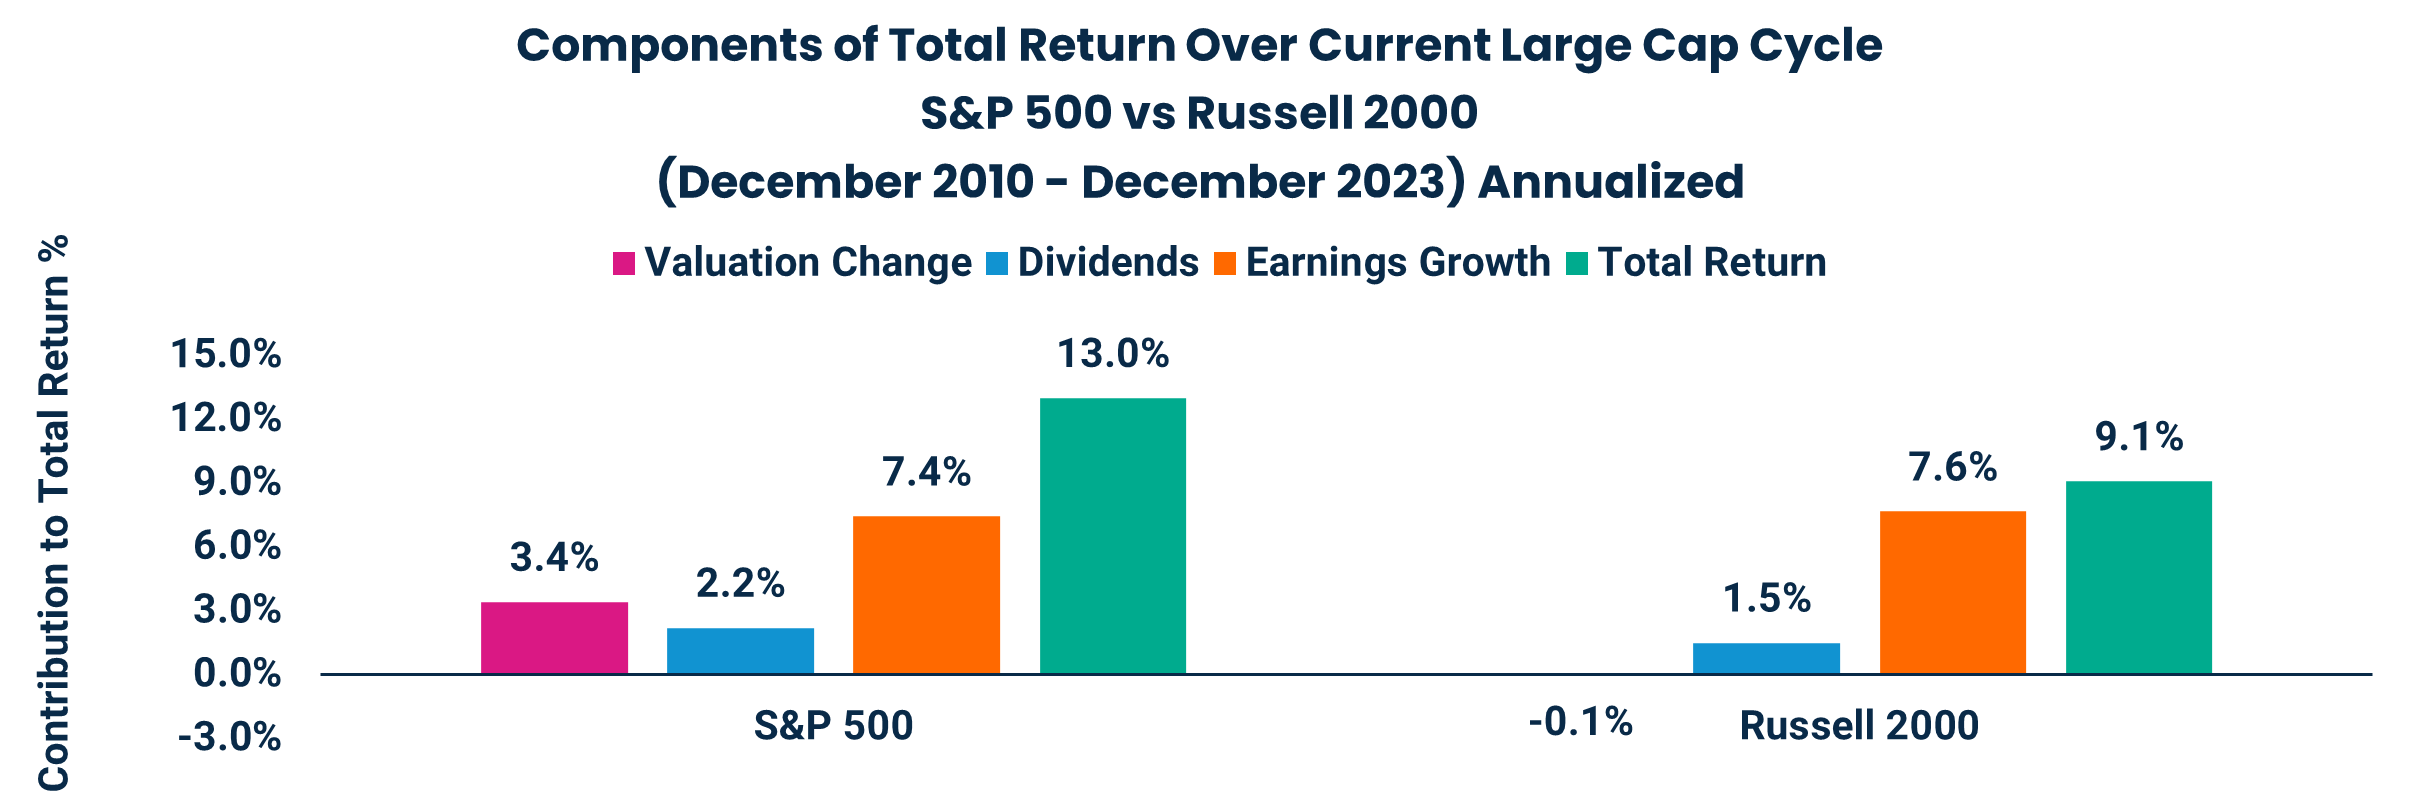 Components of Total Return Over Current Large Cap Cycle S&P 500 vs Russell 2000
(December 2010 - December 2023) Annualized